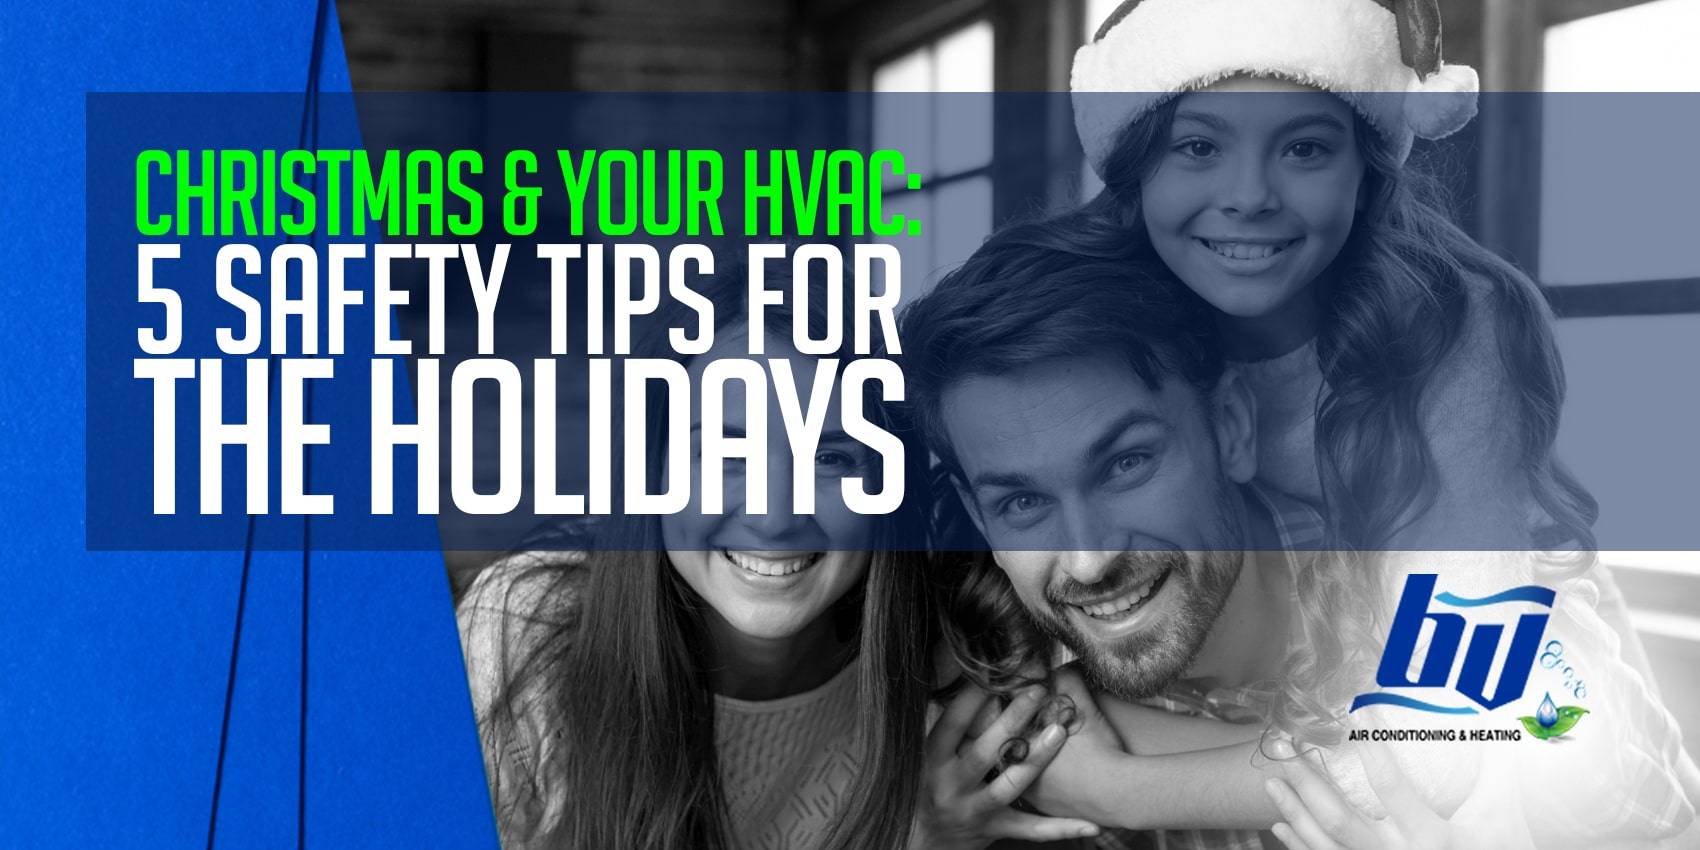 Christmas & Your HVAC: 5 Safety Tips for the Holidays